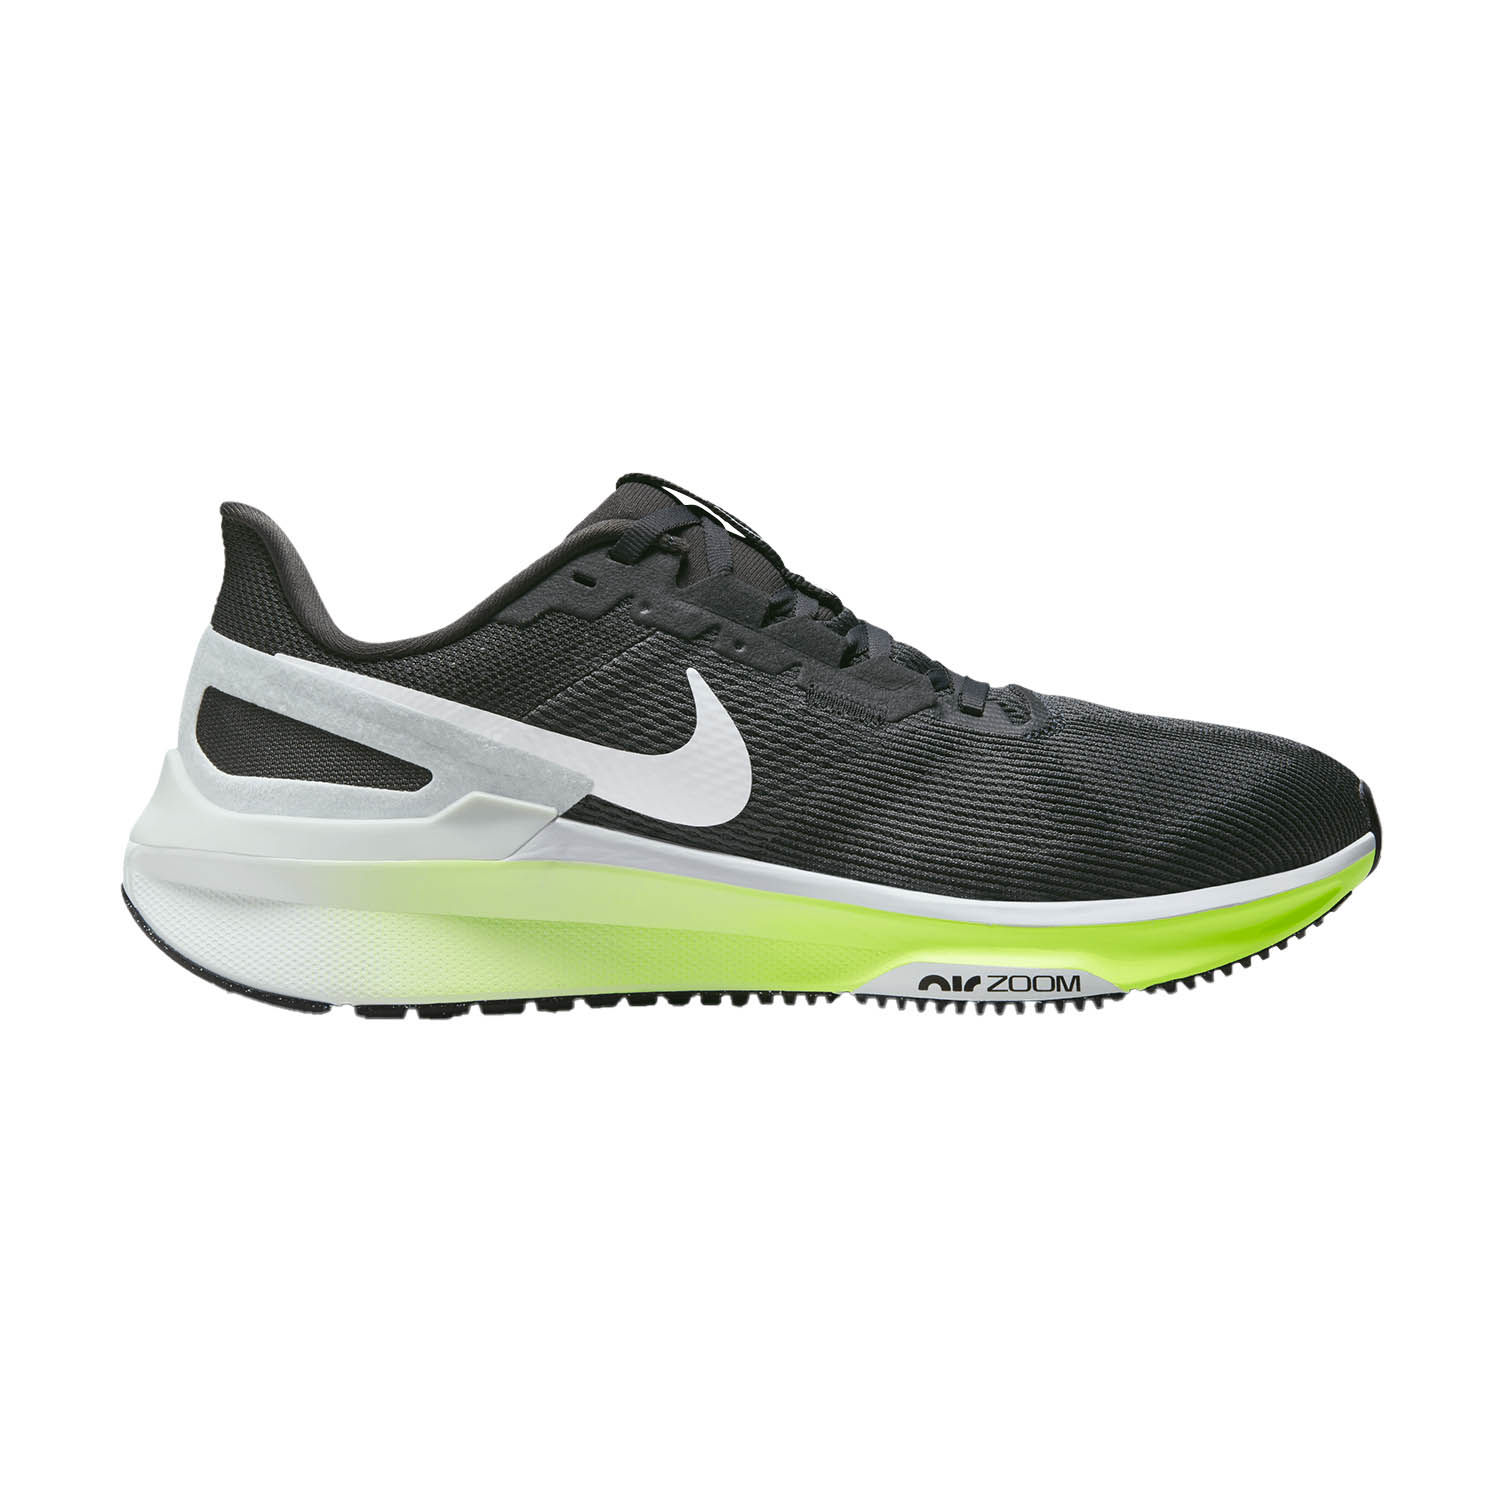 Nike Air Zoom Structure 25 Men's Running Shoes - Anthracite